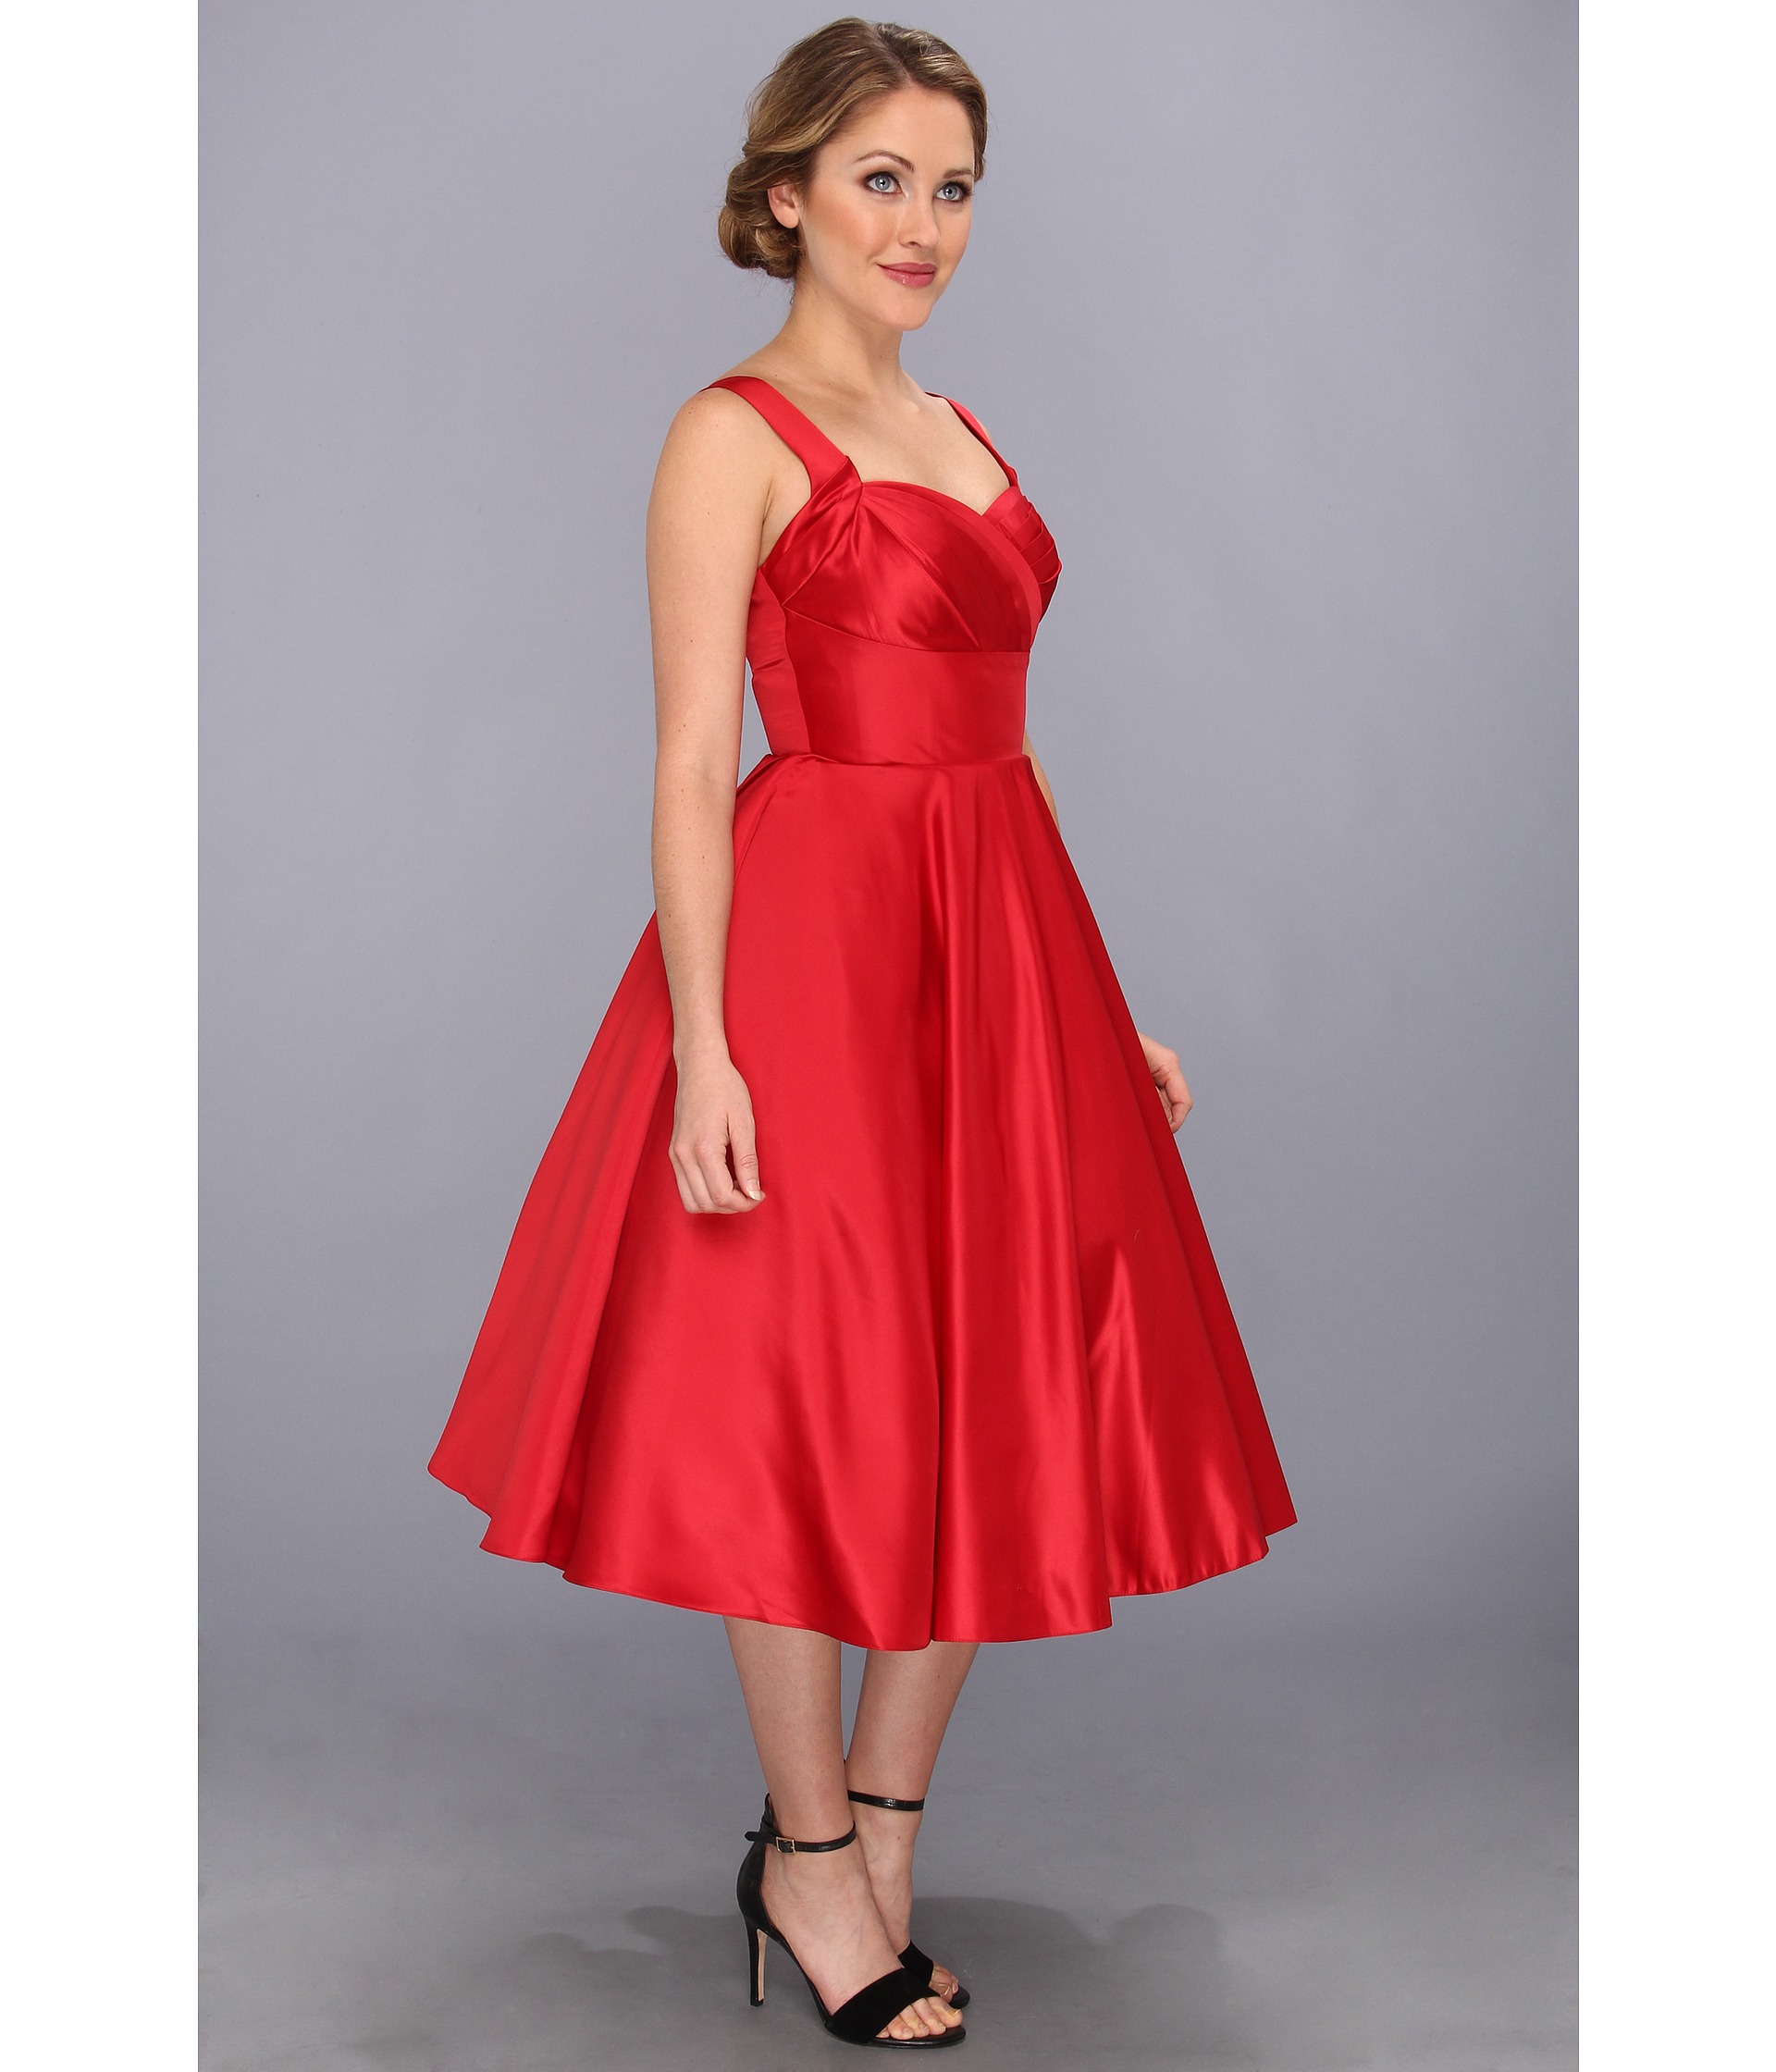 Unique Vintage Happily Ever After Dress Red | Shipped Free at Zappos